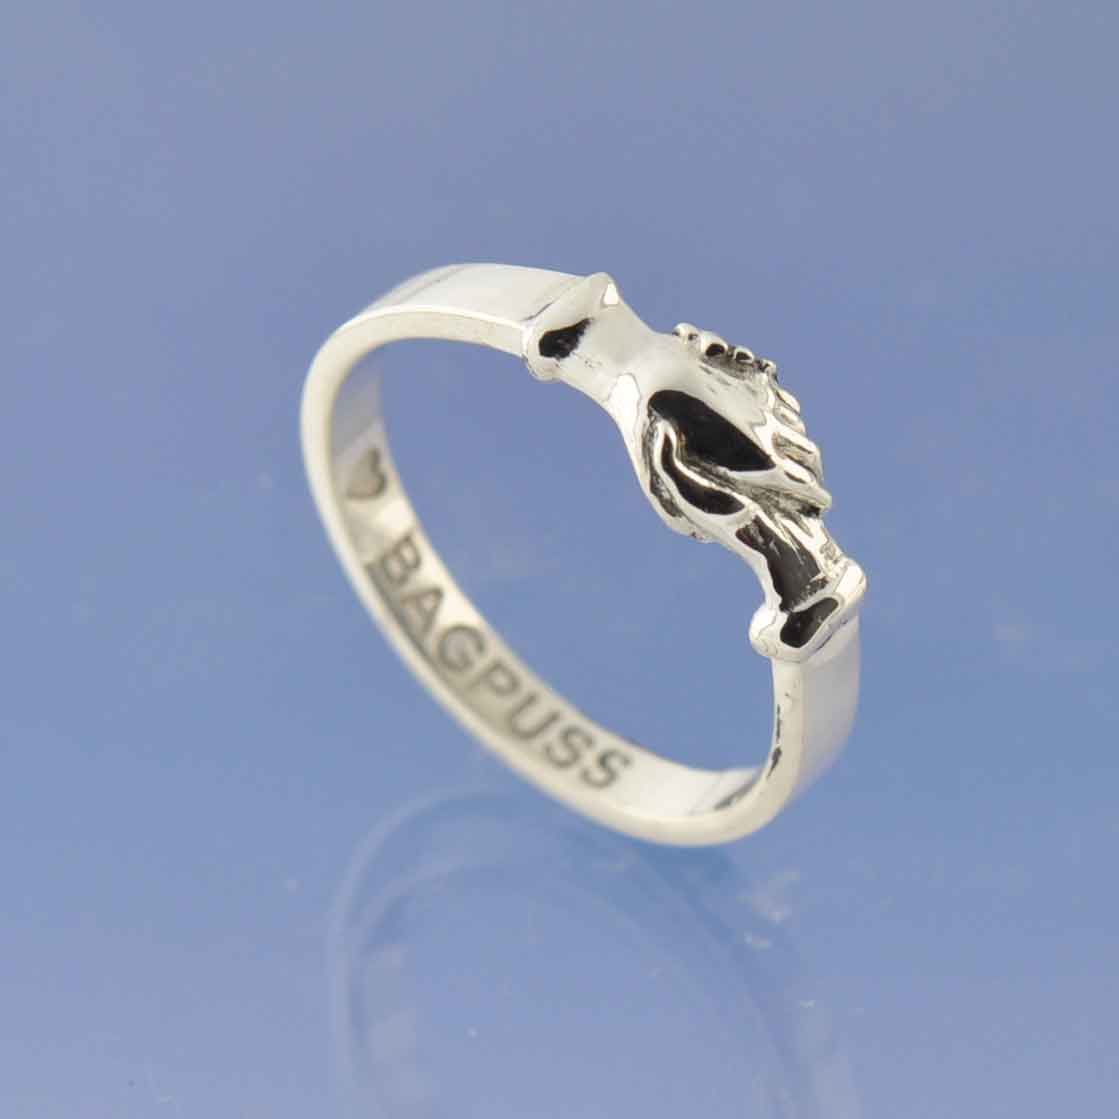 Holding Hands Ring with Cremation Ashes 3mm Ring by Chris Parry Jewellery